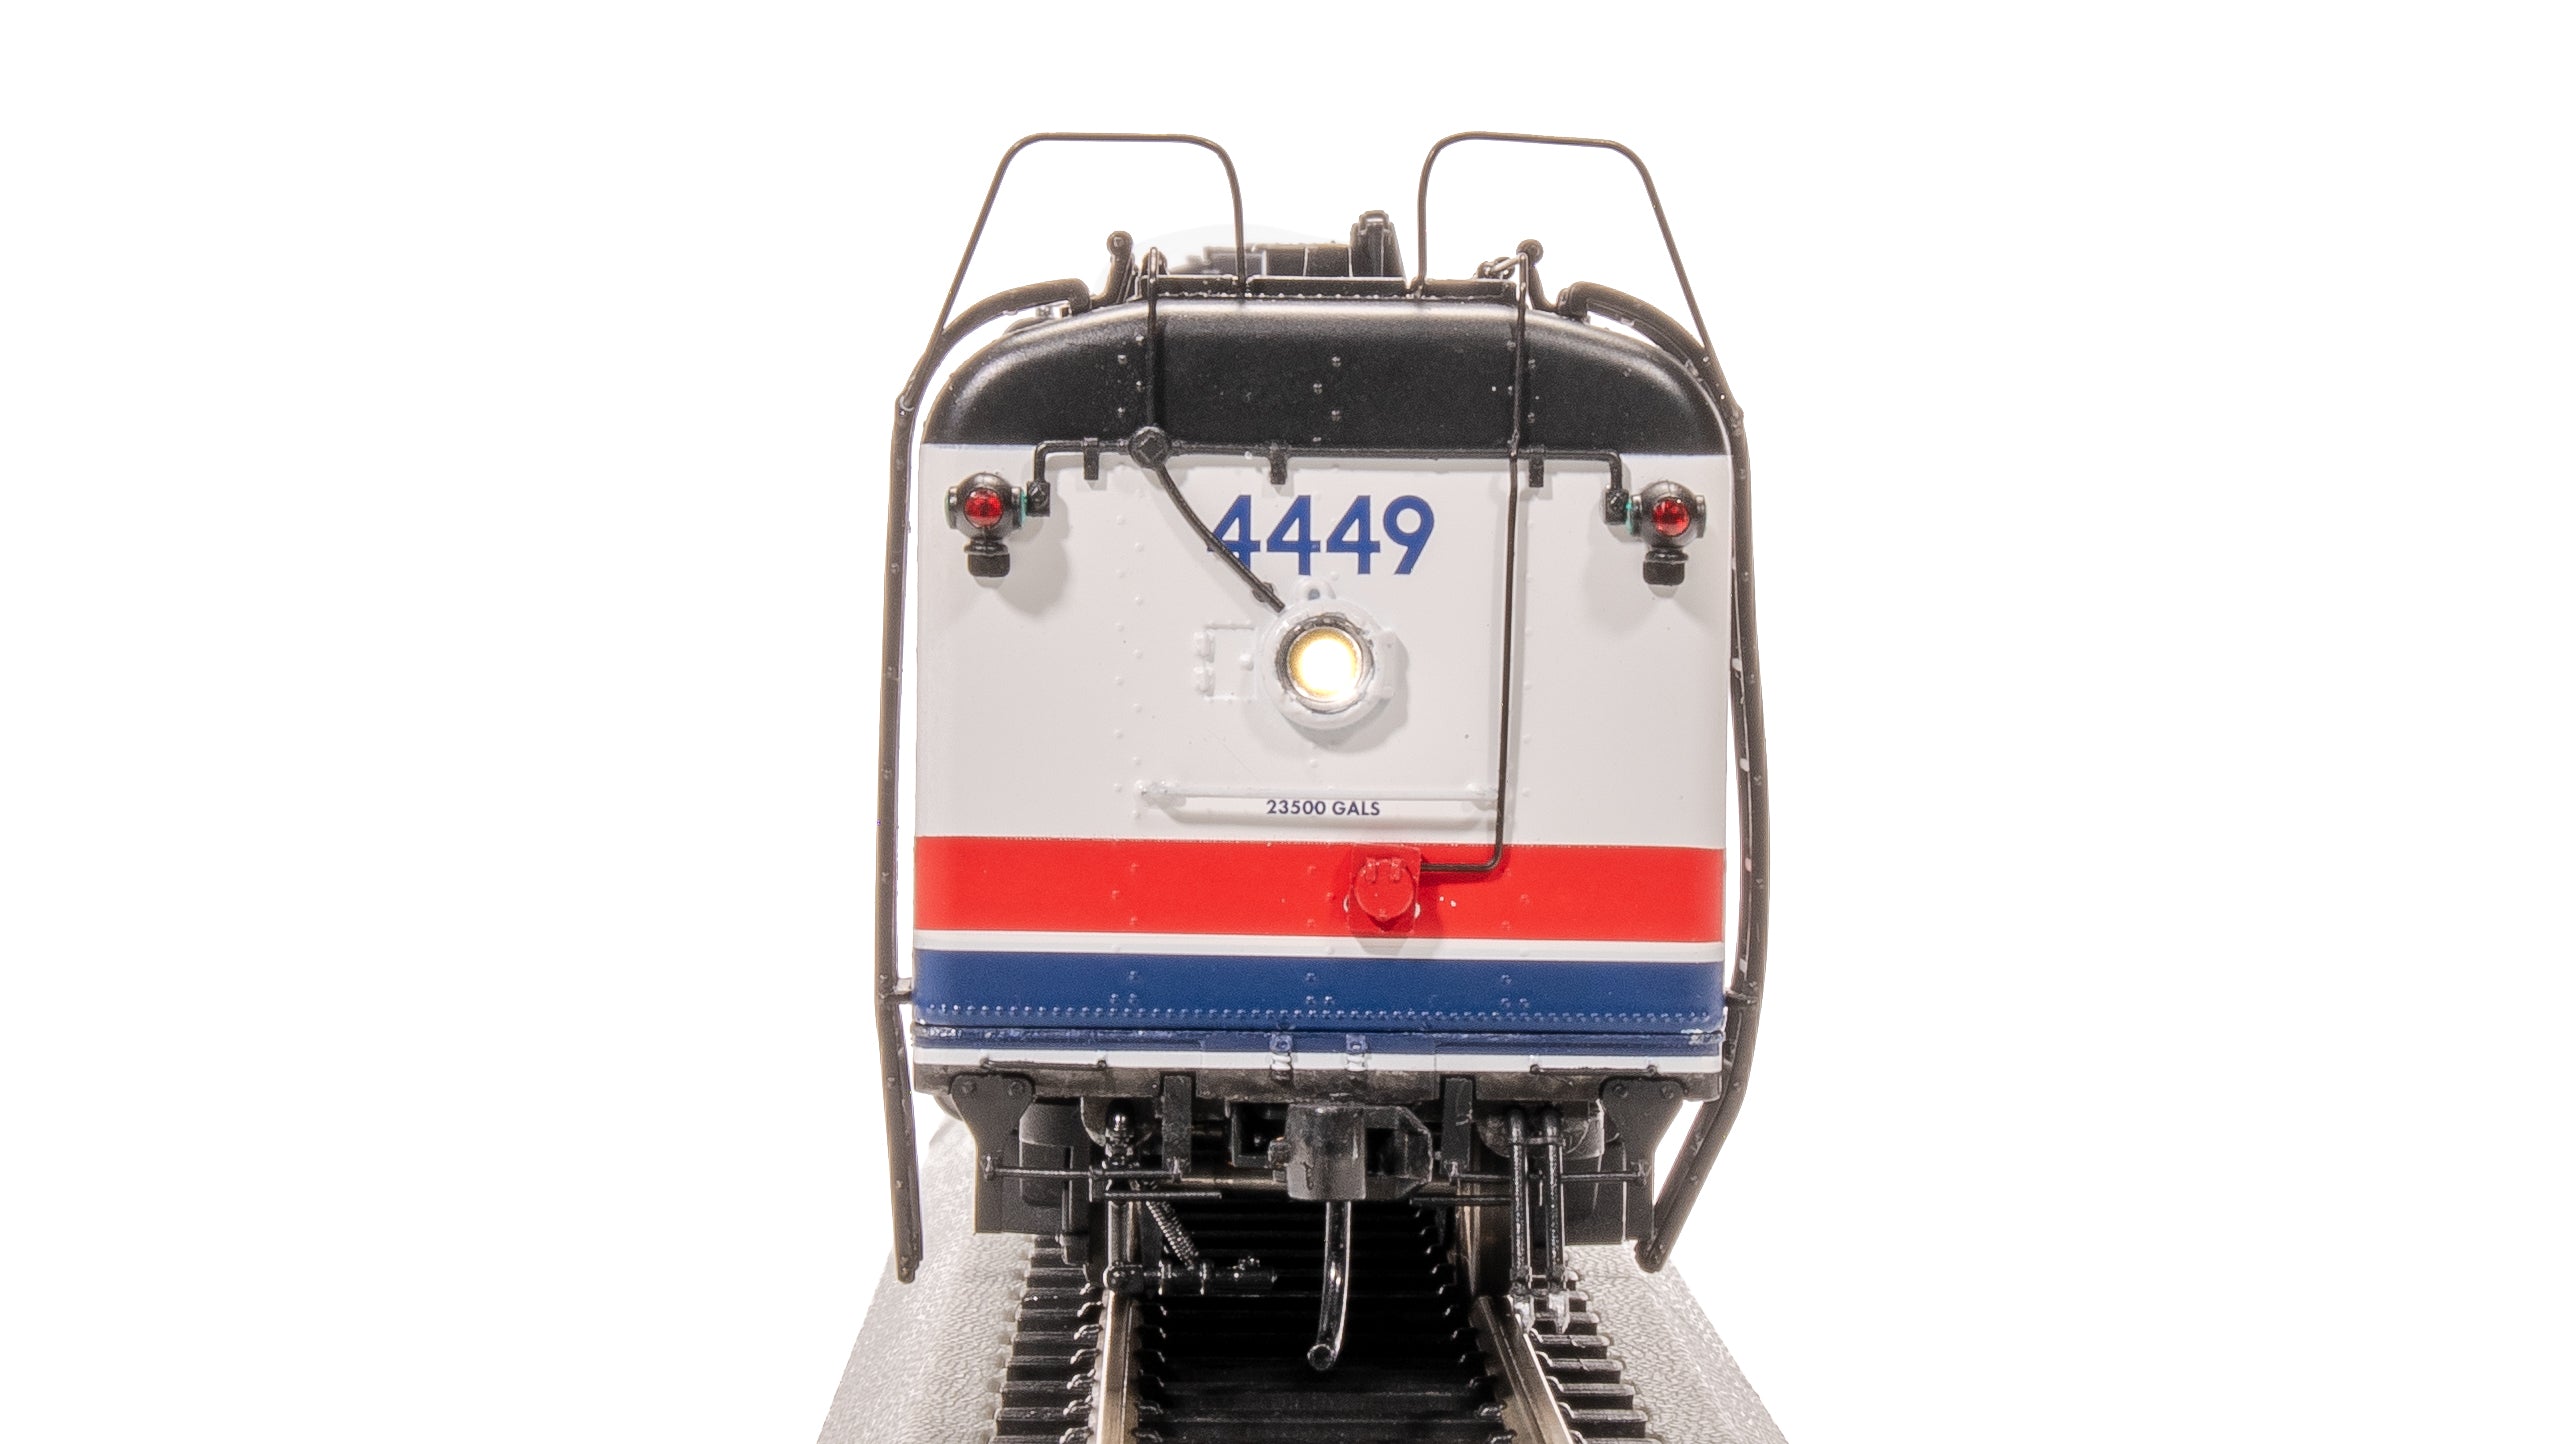 7612 Southern Pacific GS-4, #4449, 1975 American Freedom Train, Paragon4 Sound/DC/DCC, Smoke, HO